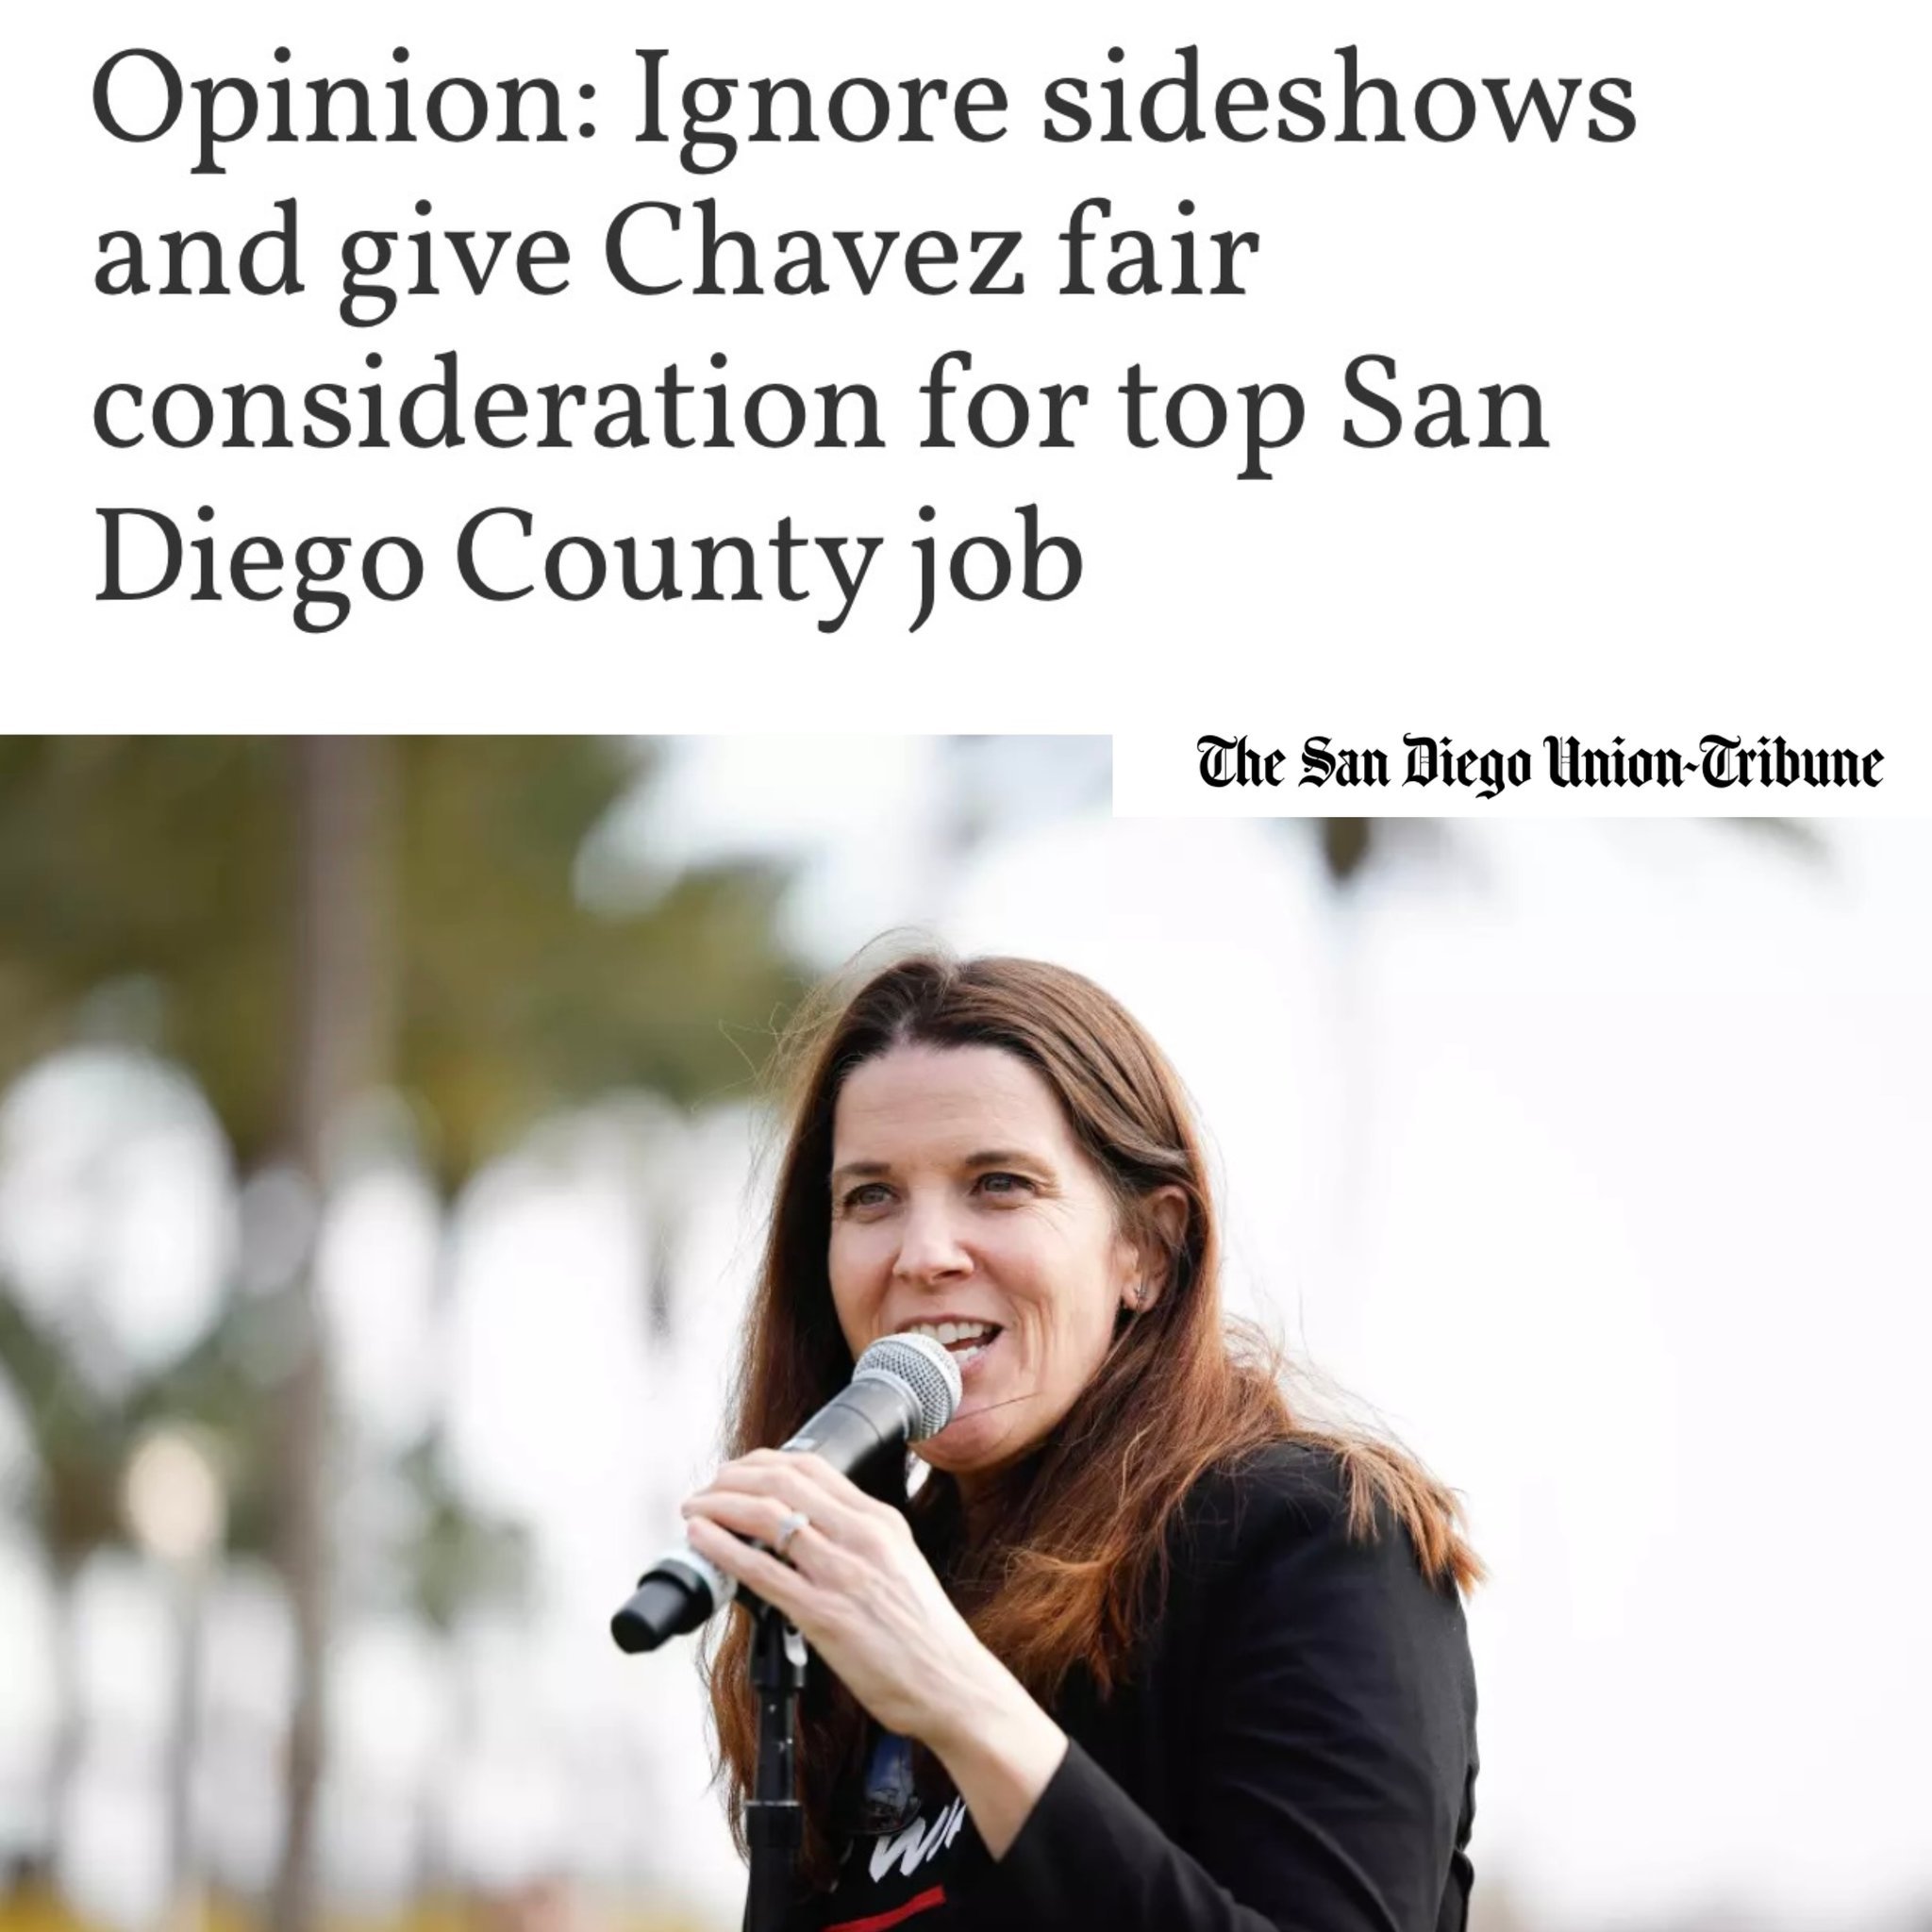 San Diego Union Tribune

Opinion: Ignore sideshows and give Chavez fair consideration for top San Diego County job 

Written by @repjuanvargas ✍️

Click the link in bio view the full article 📲